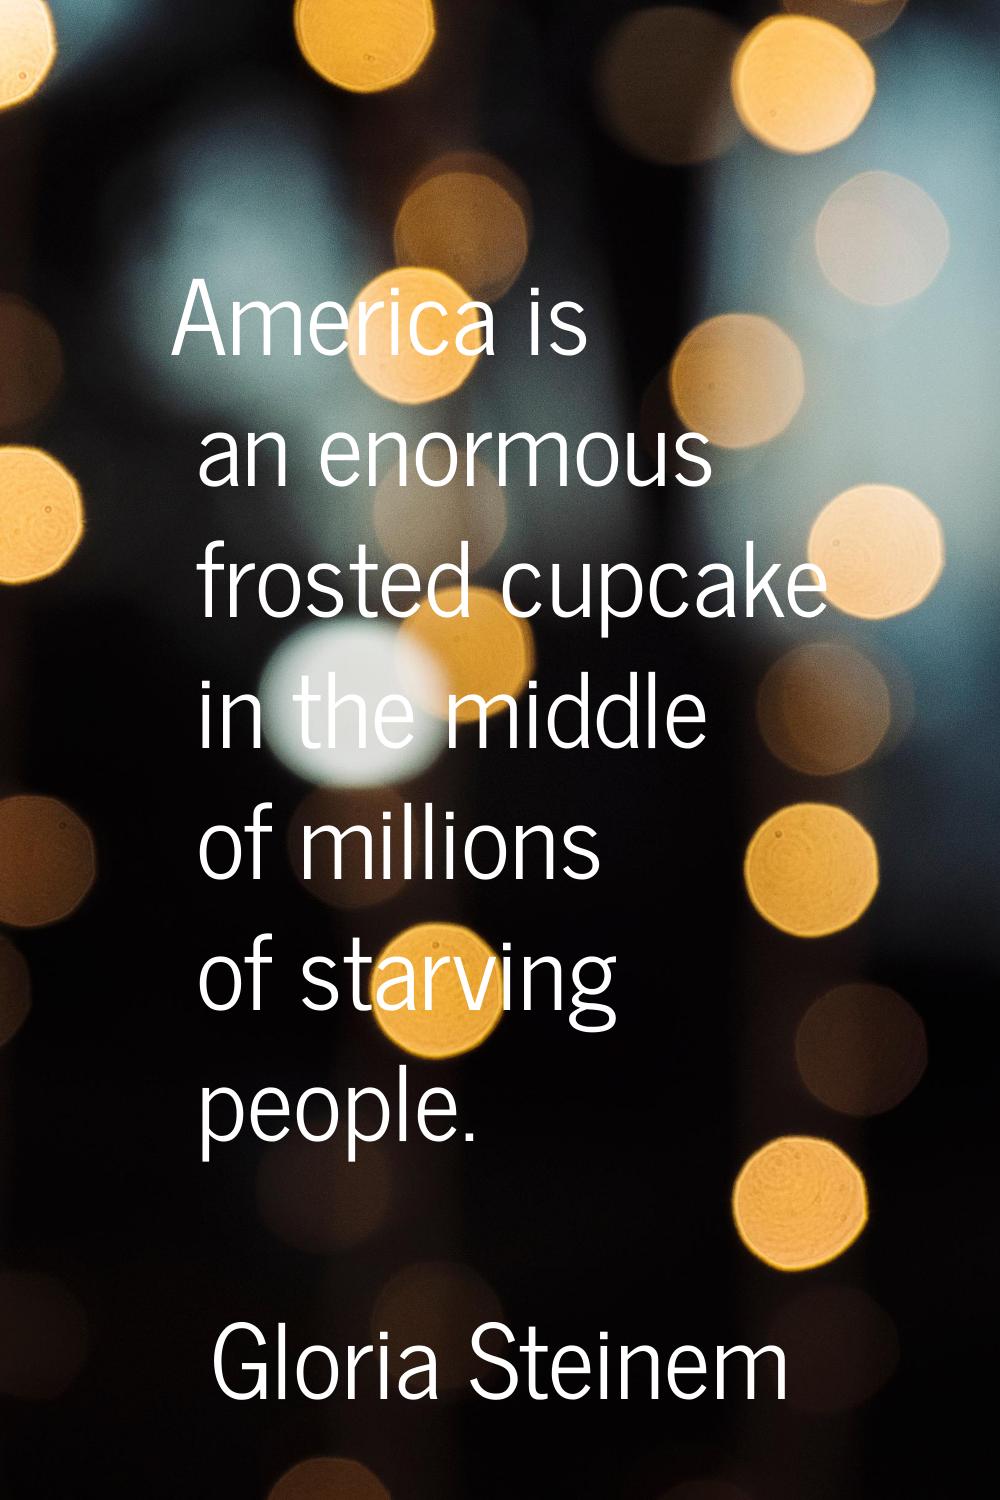 America is an enormous frosted cupcake in the middle of millions of starving people.